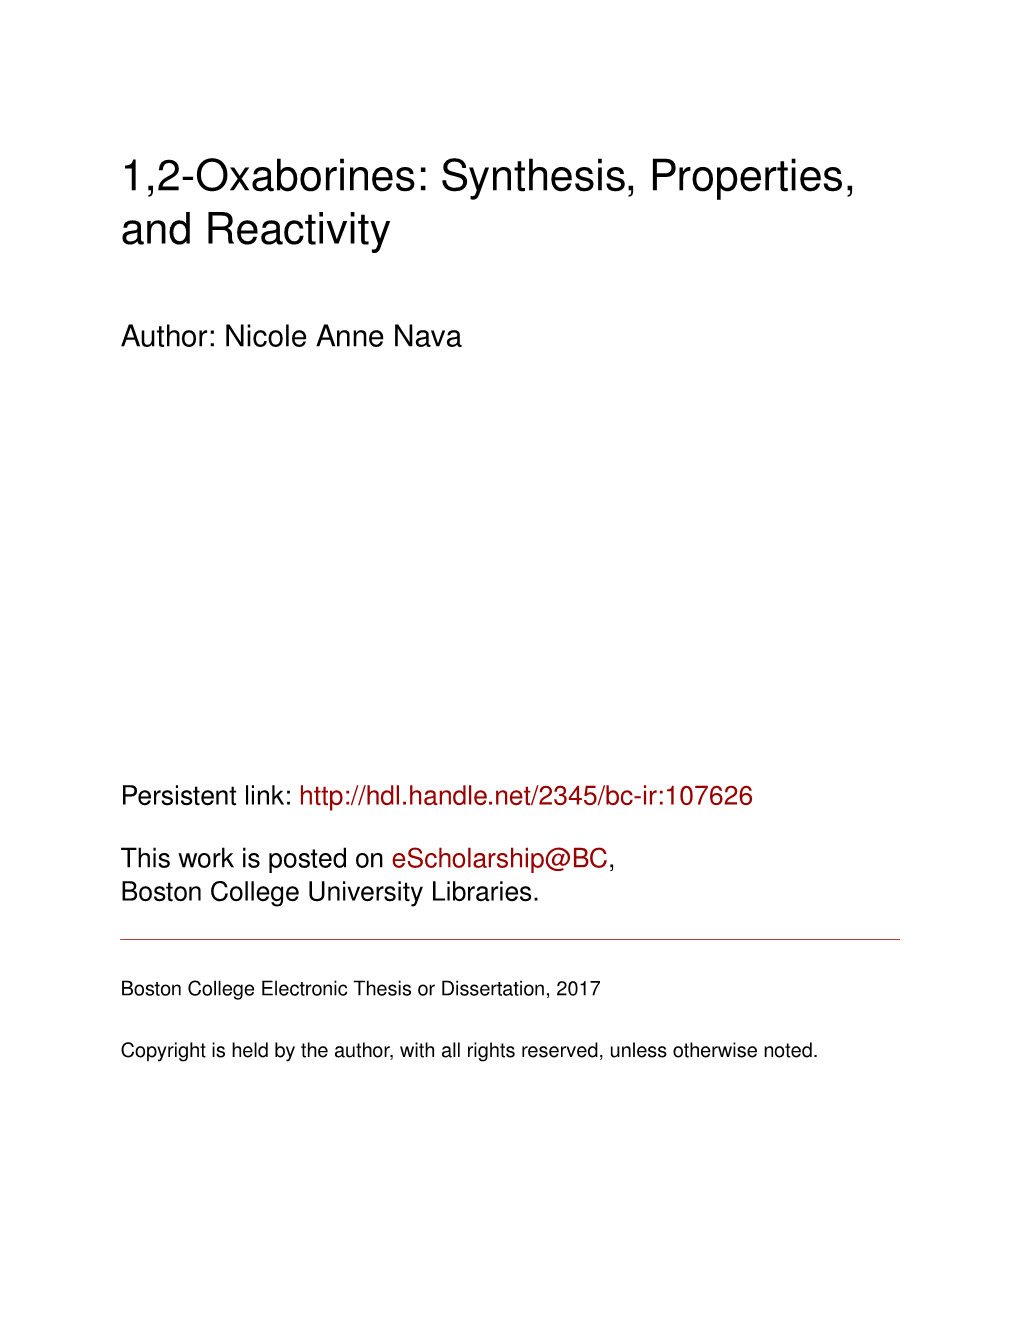 1,2-Oxaborines: Synthesis, Properties, and Reactivity